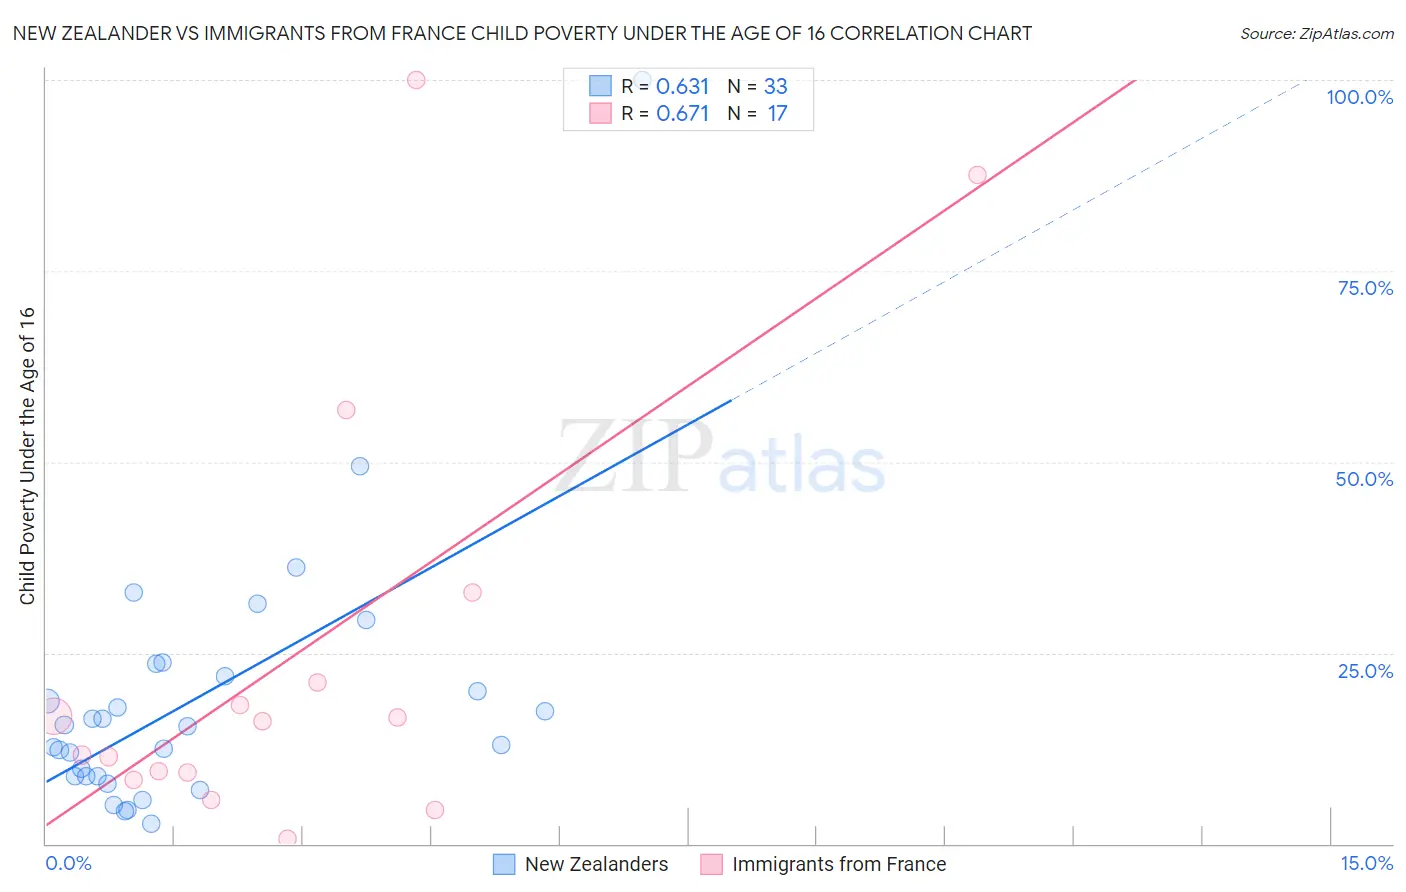 New Zealander vs Immigrants from France Child Poverty Under the Age of 16